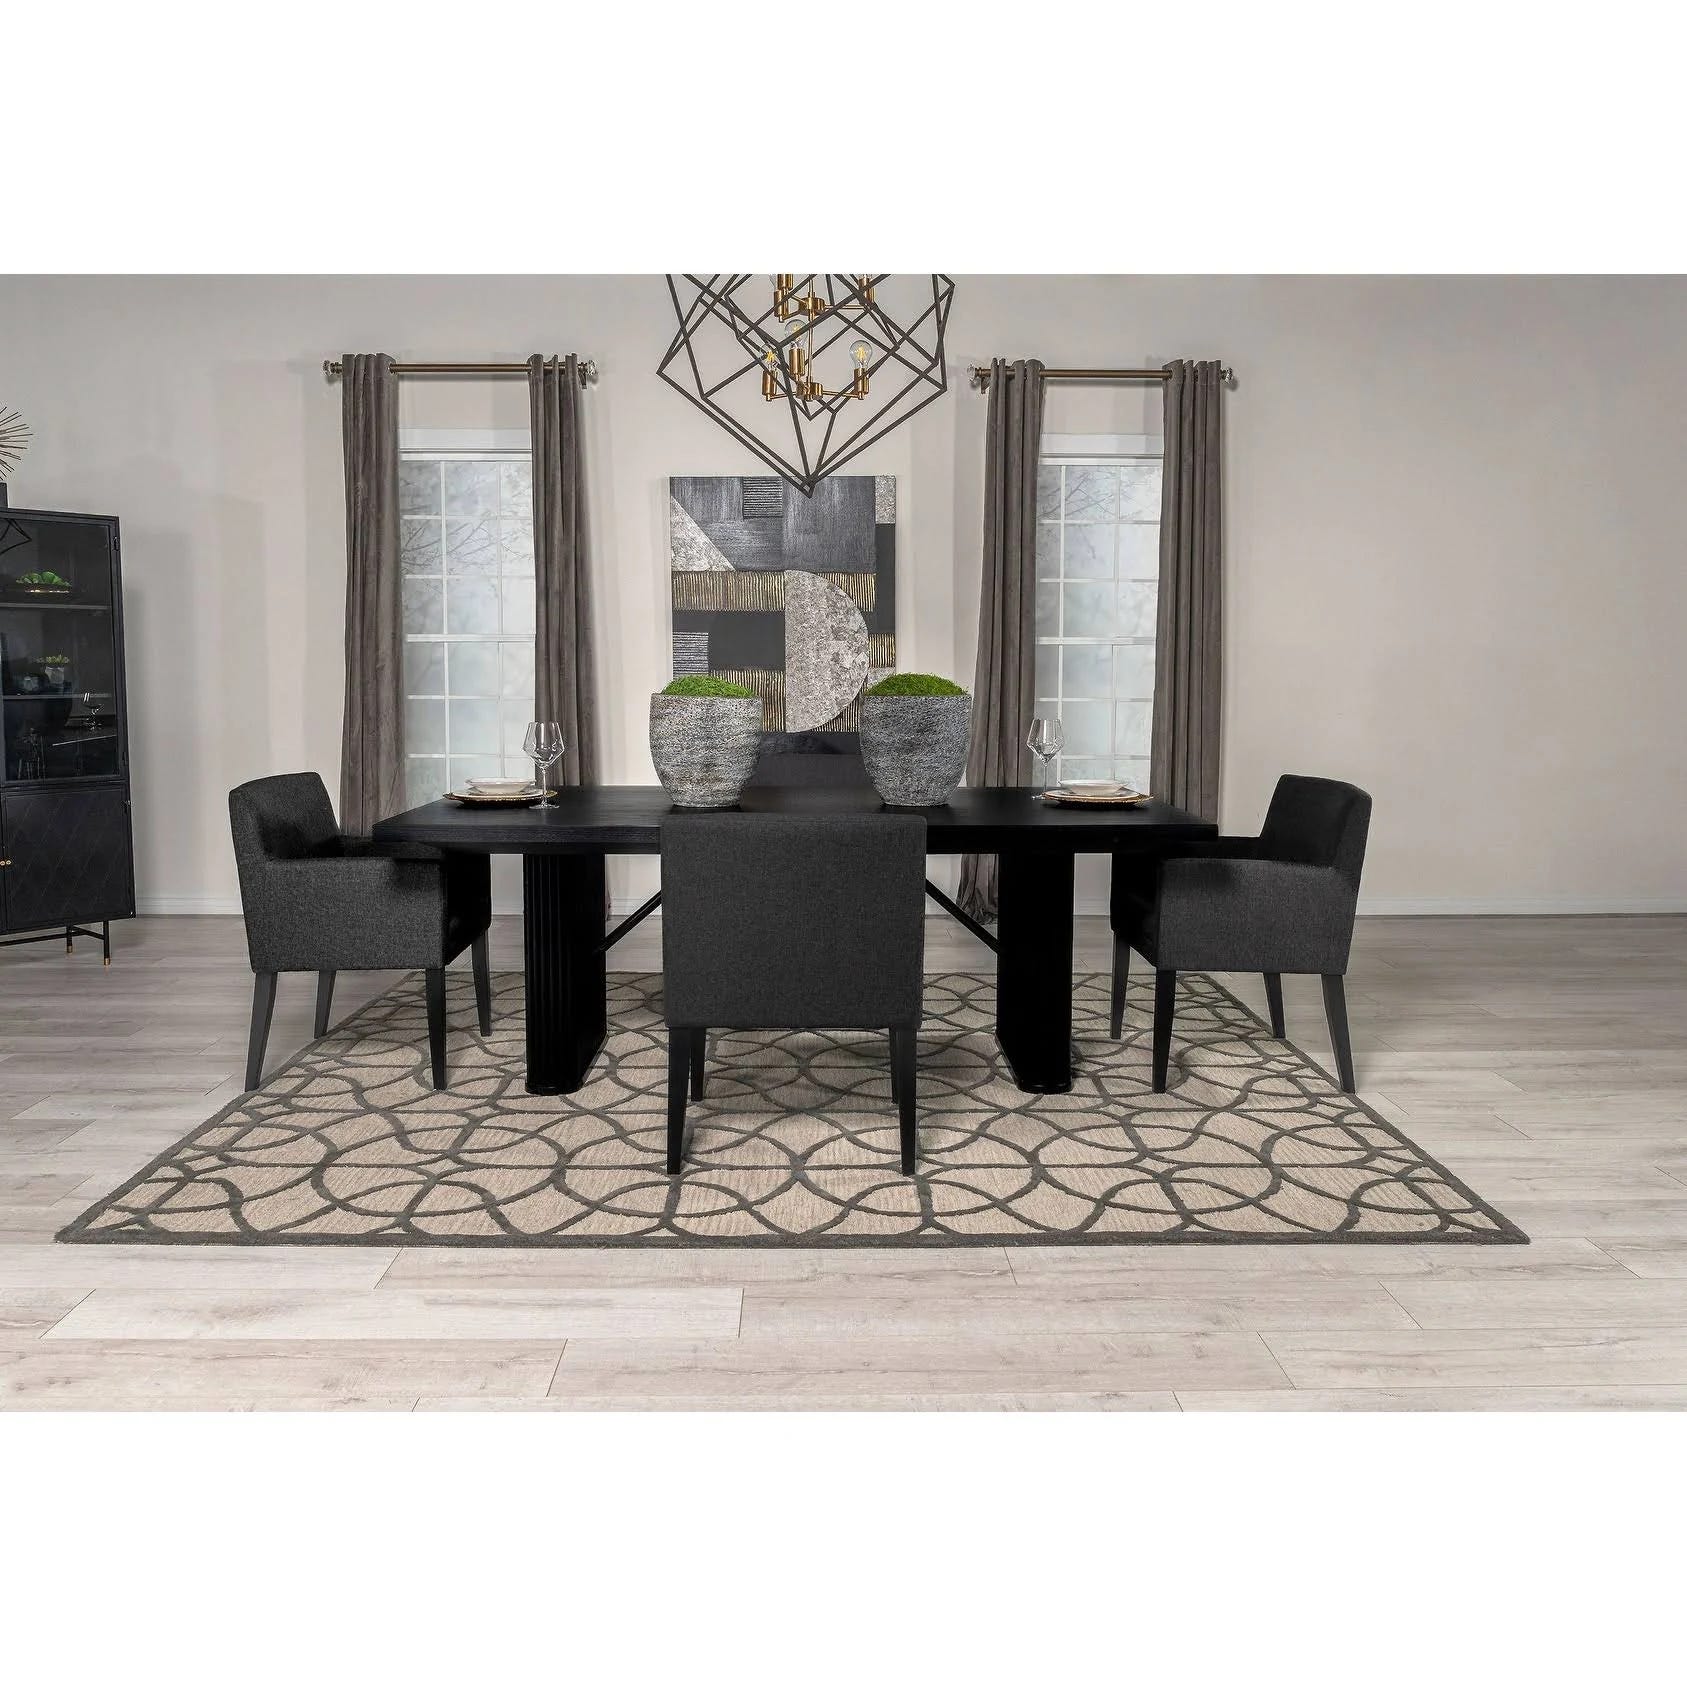 Coaster Catherine Dining Table Set: Charcoal Grey and Black Double Pedestal Style | Image